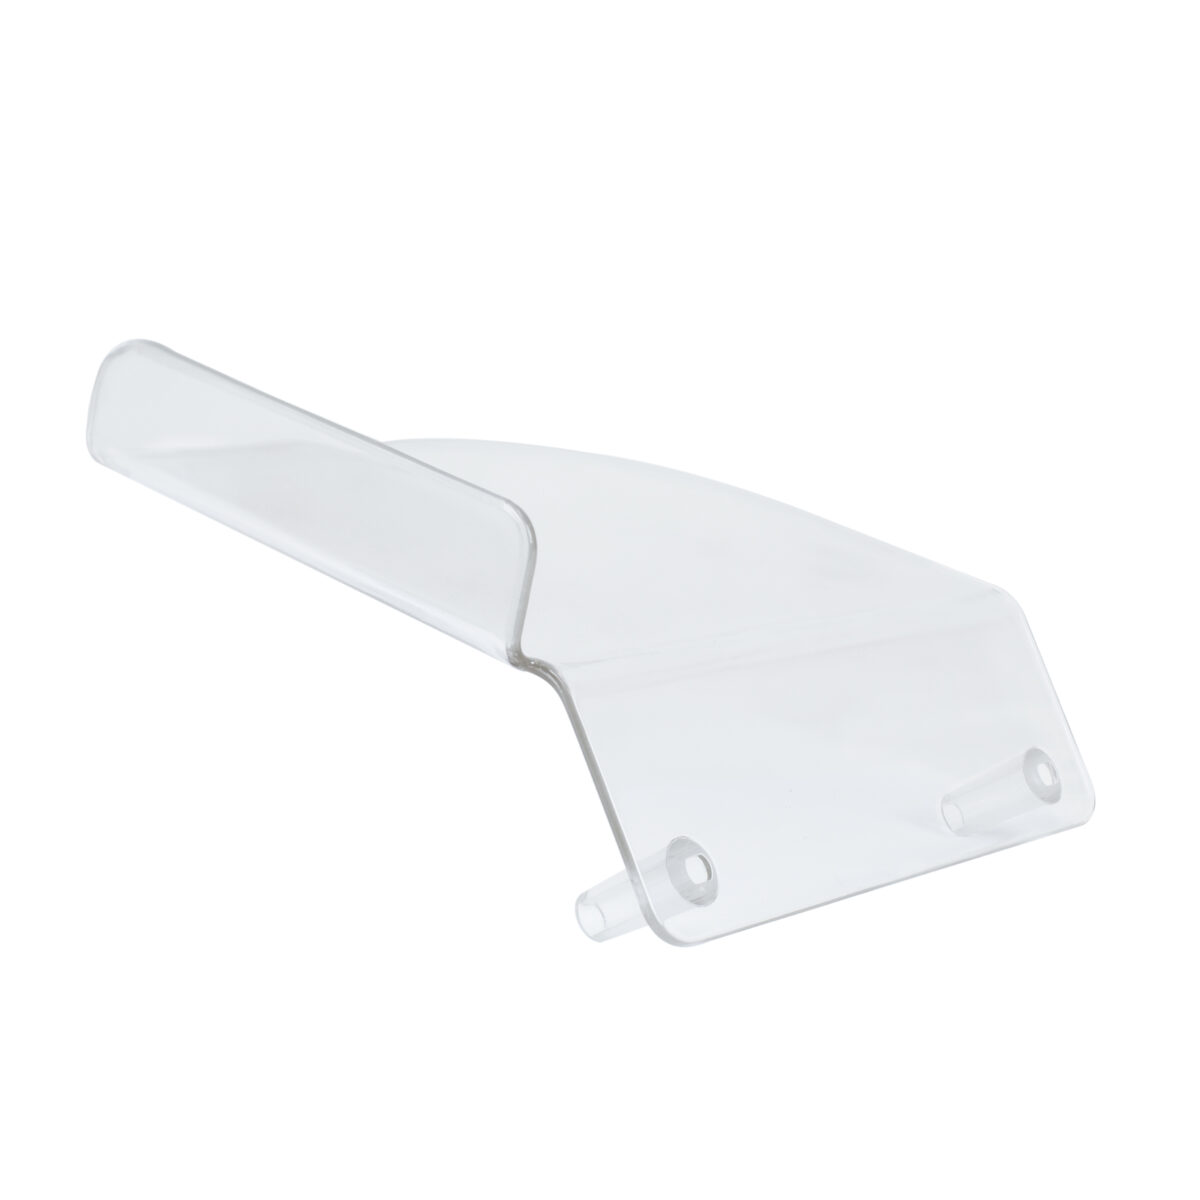 Hand Guard for 12 inches Meat Slicer (Fit Models MS-12NS, MS-12NT, MS-12DS,  MS-12DT, MS-12SL) - Kitchenware Station